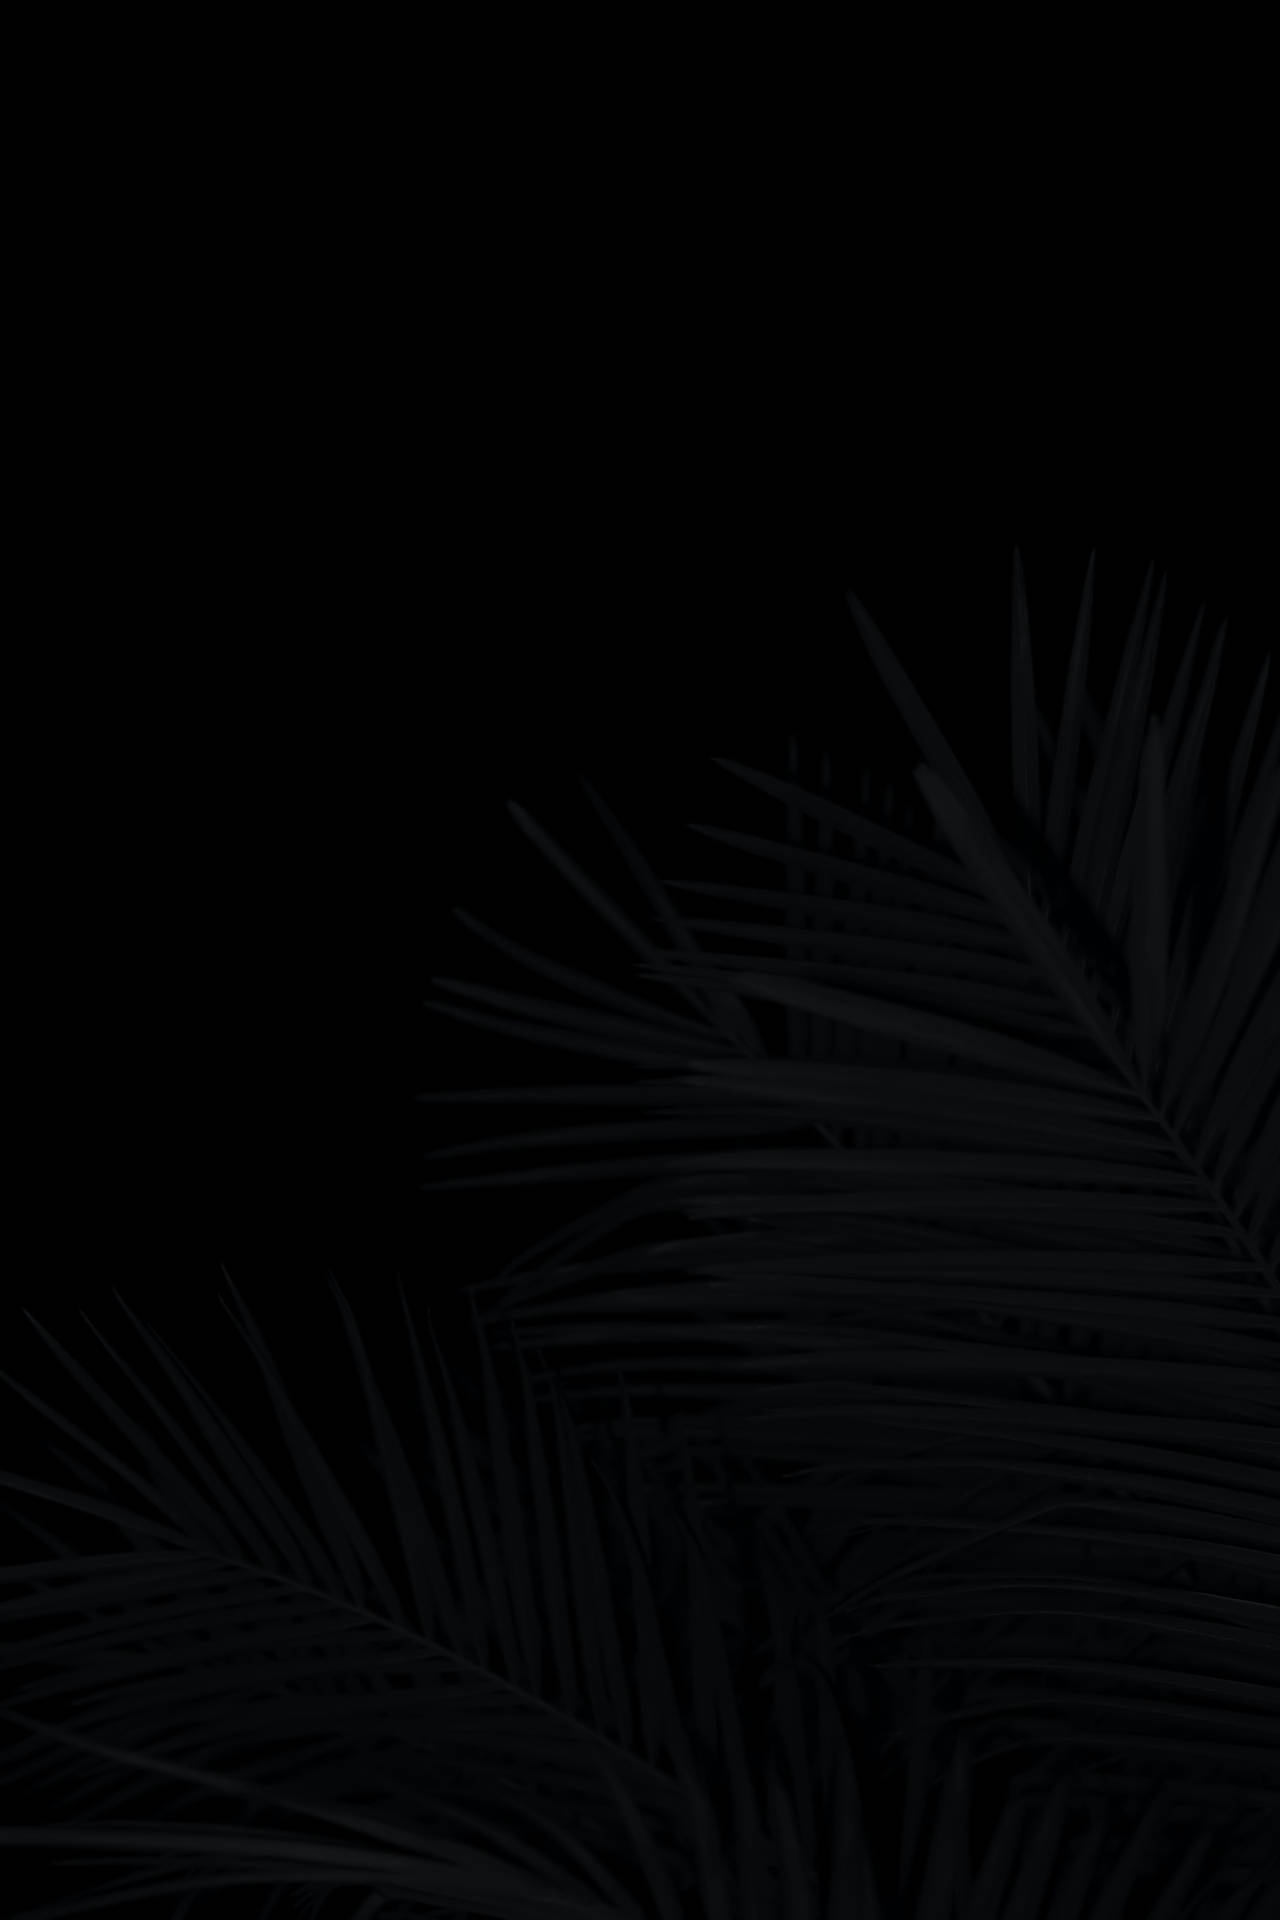 Palm Leaves Black Aesthetic Tumblr Iphone Background